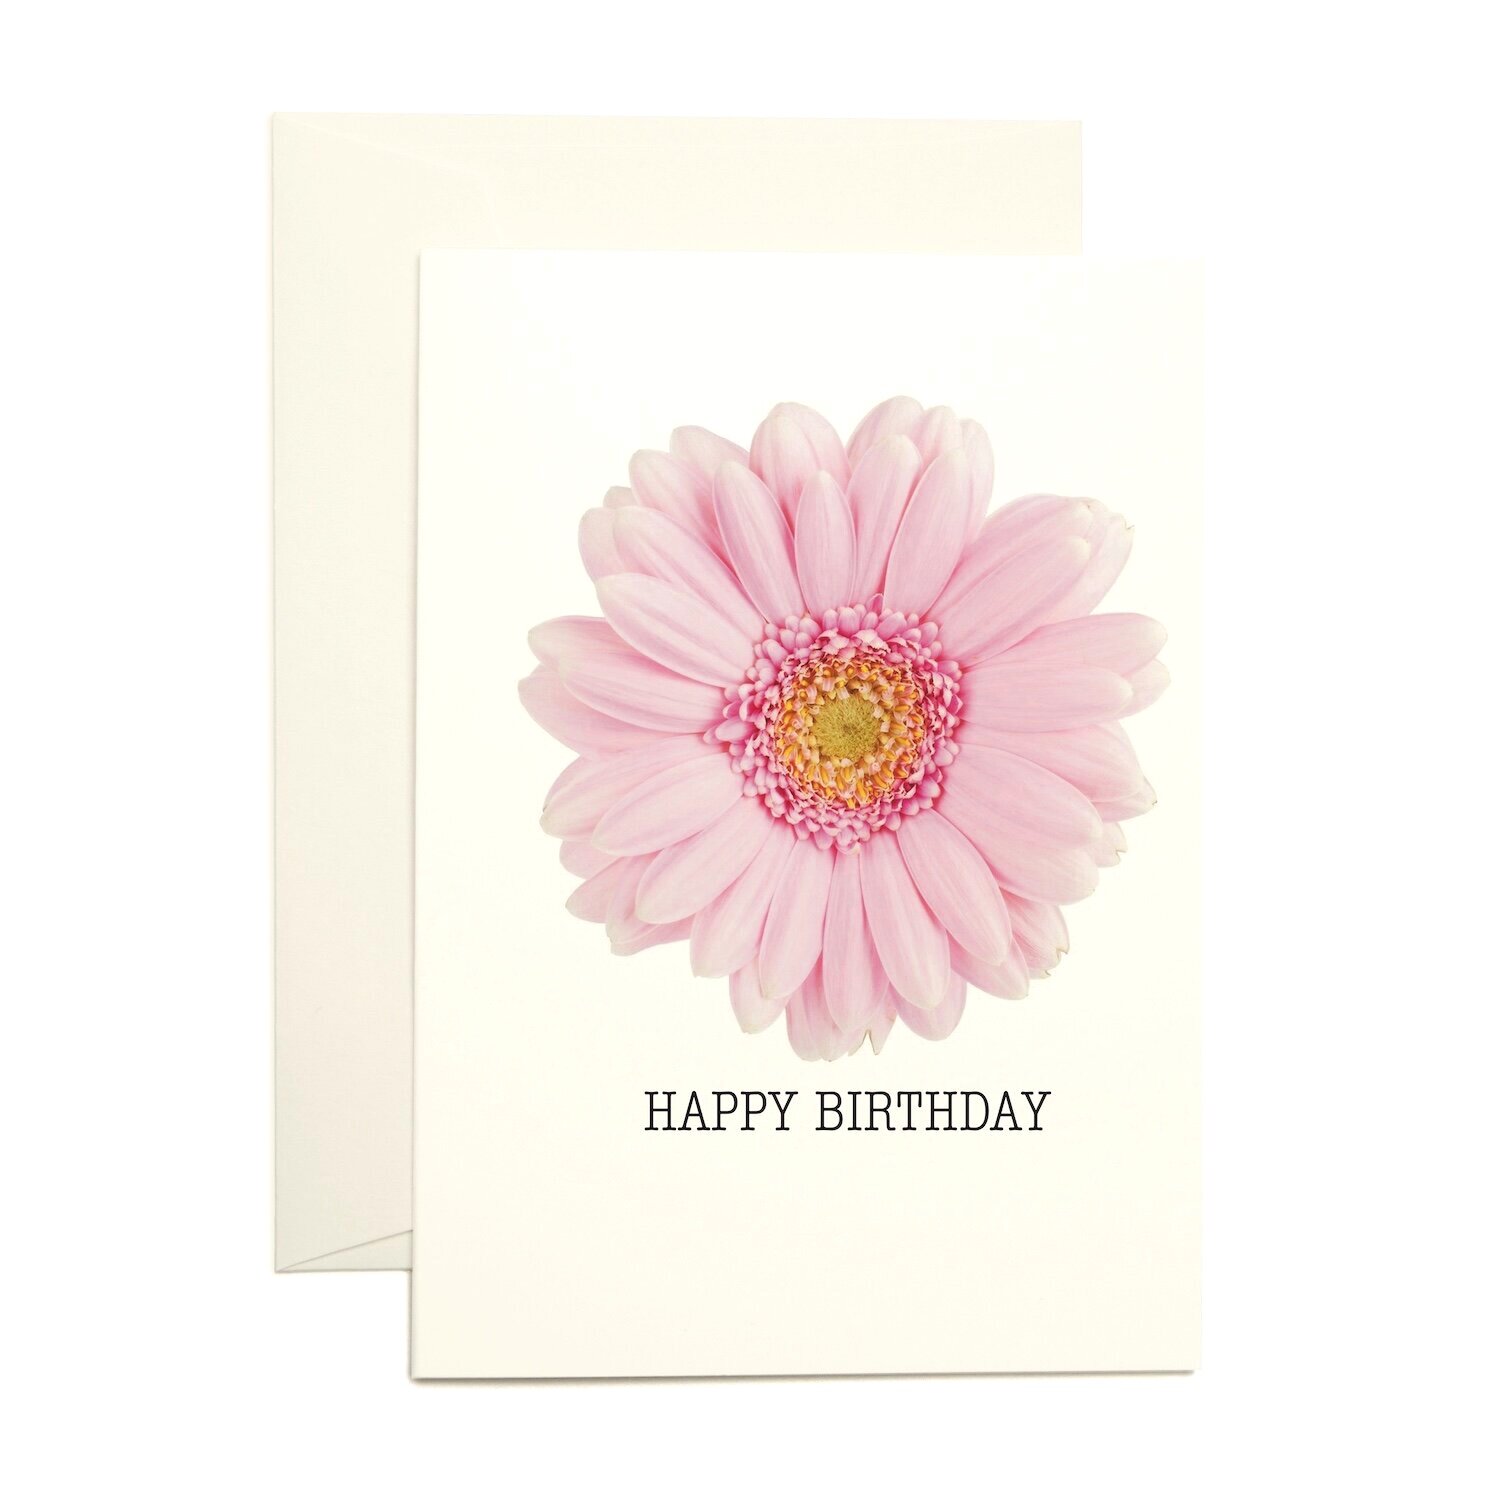 Set of 10 assorted BIRTHDAY cards to connect with friends while 